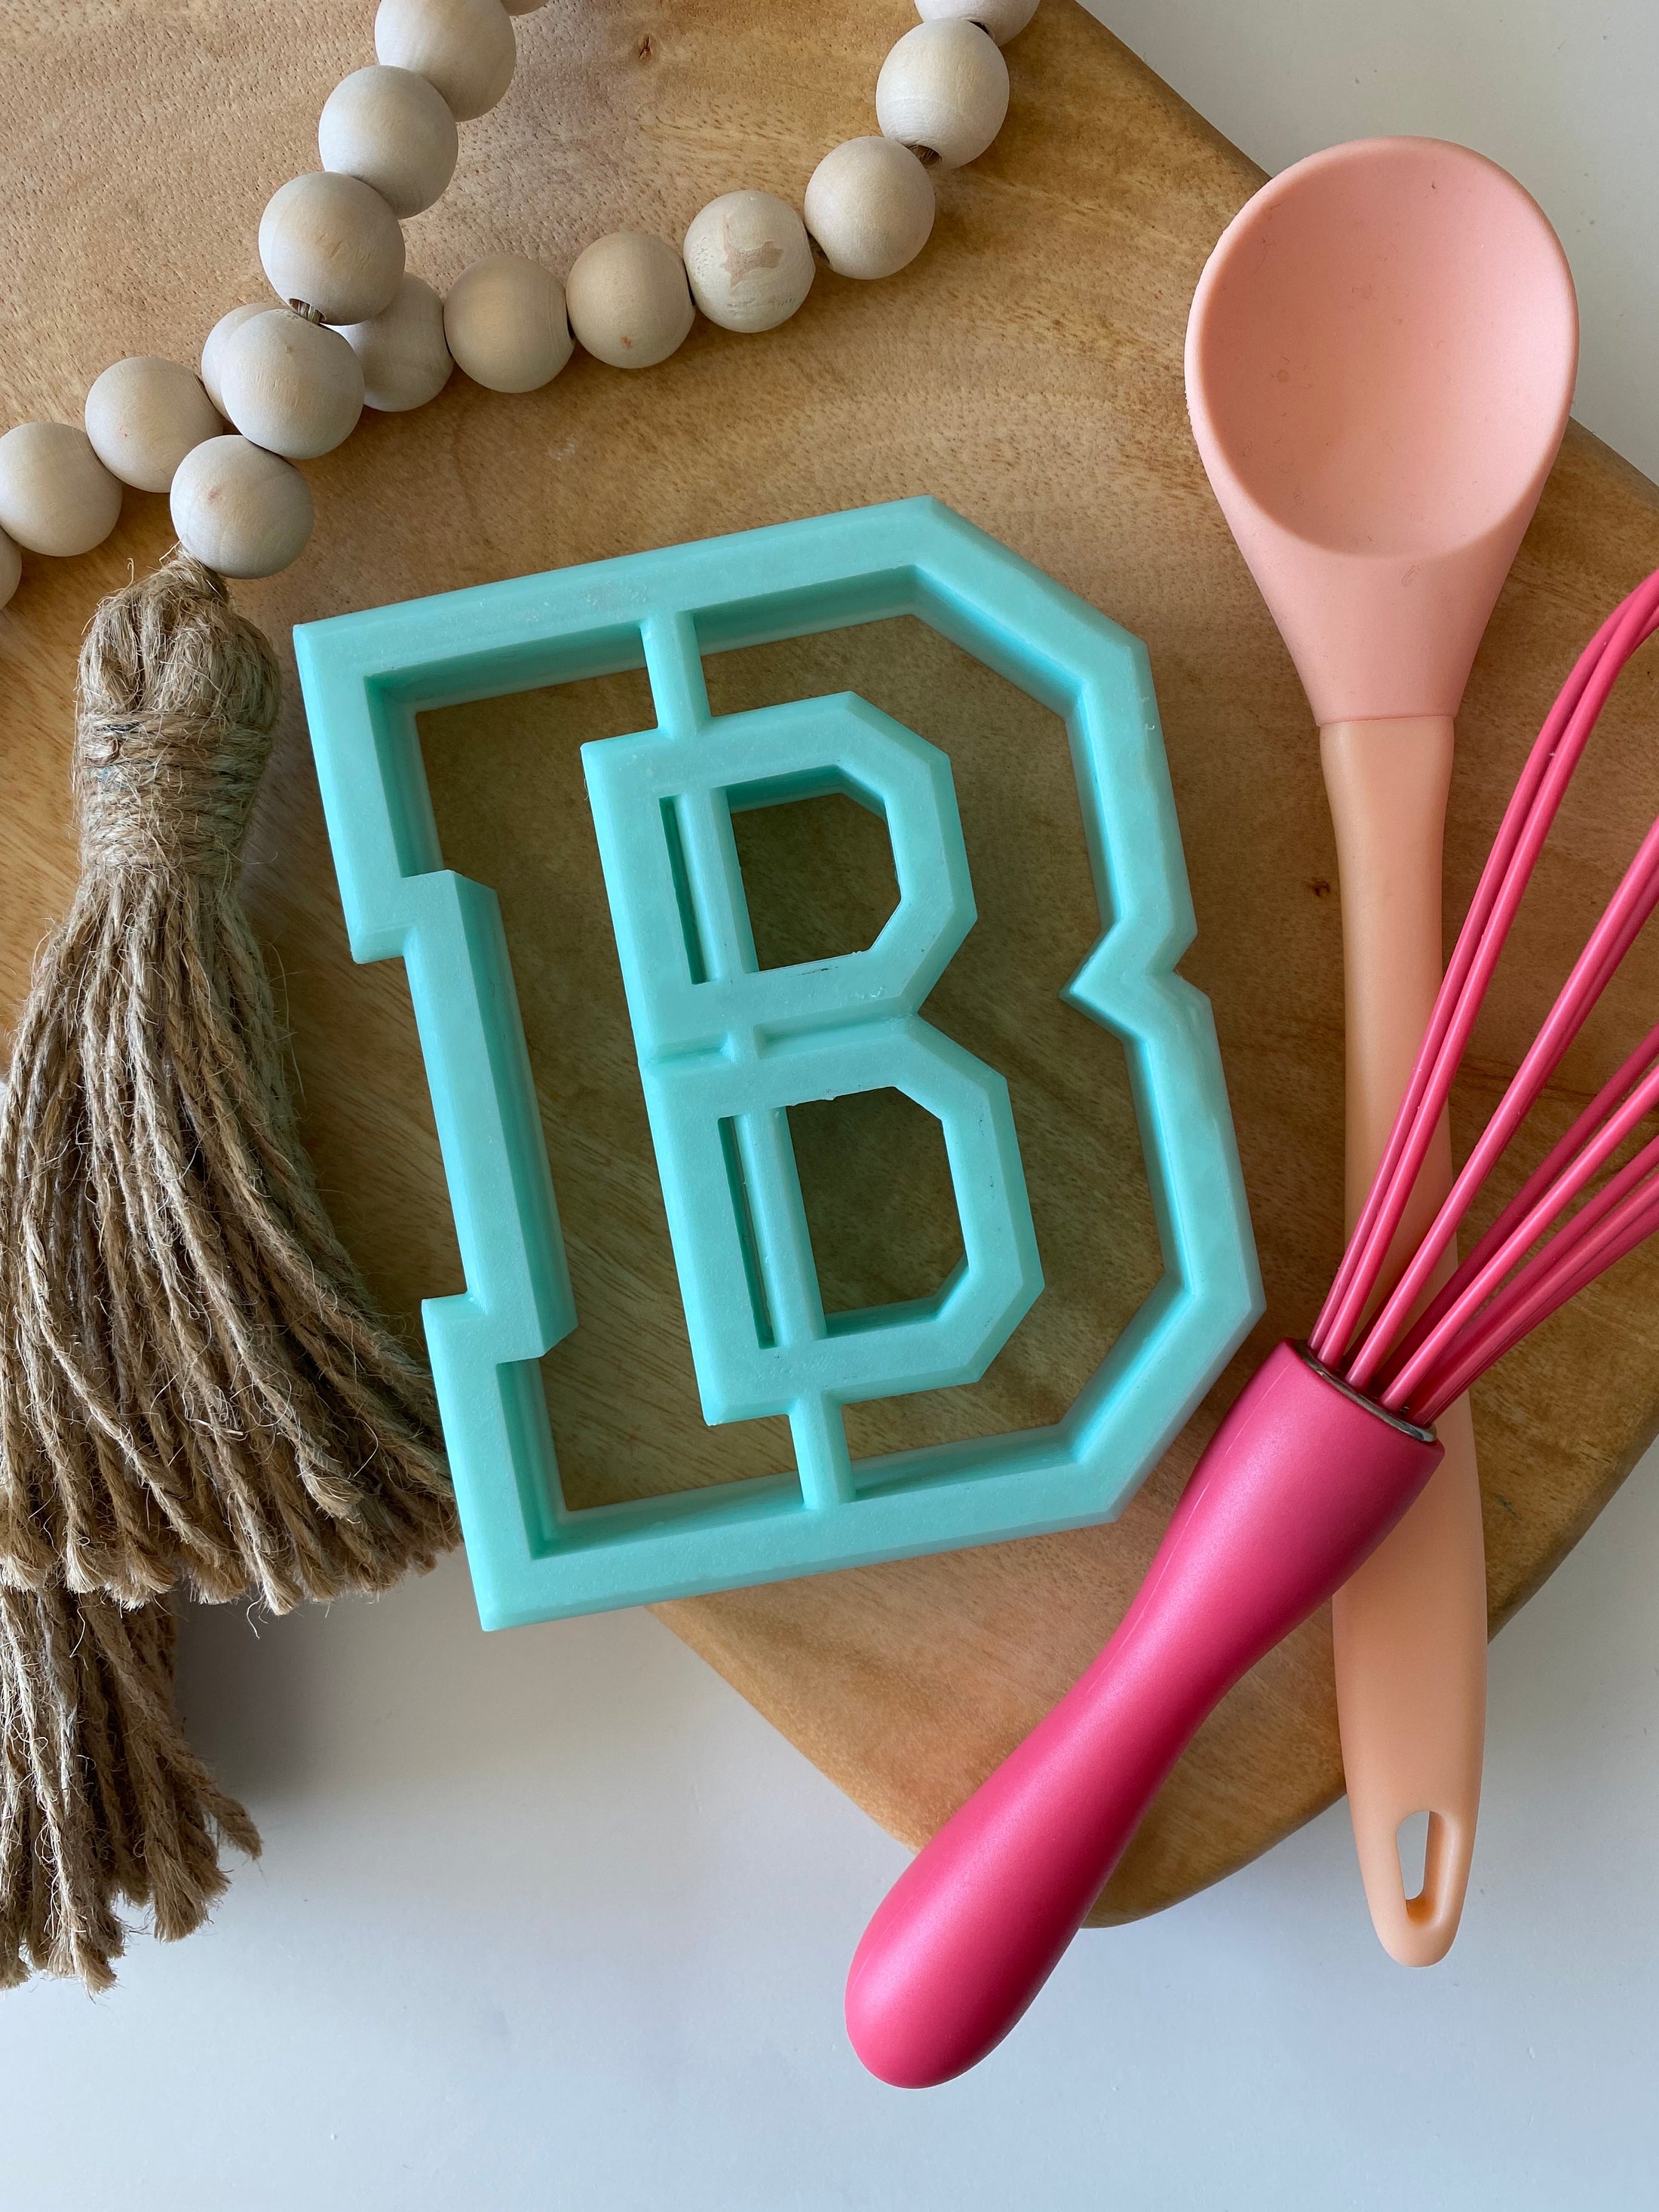 4 inch letter B cookie cutter